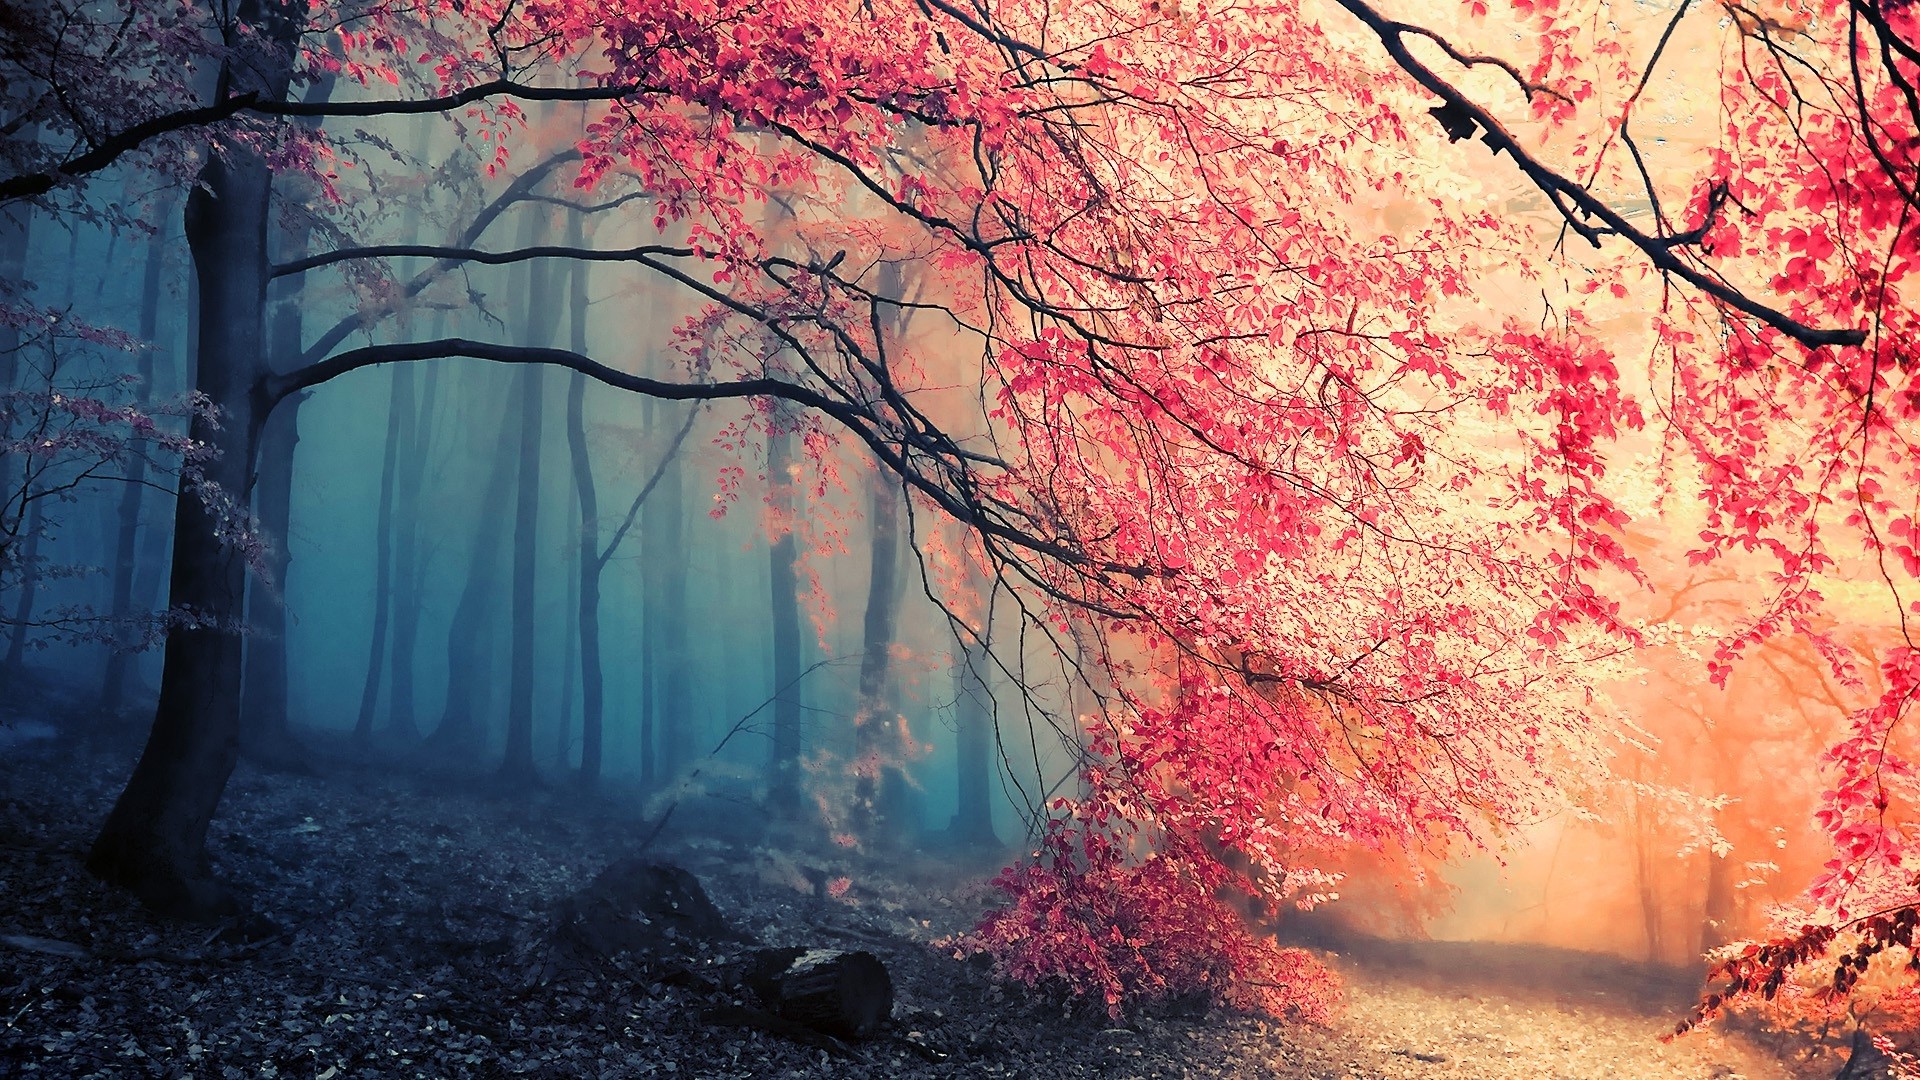 General 1920x1080 forest trees pink